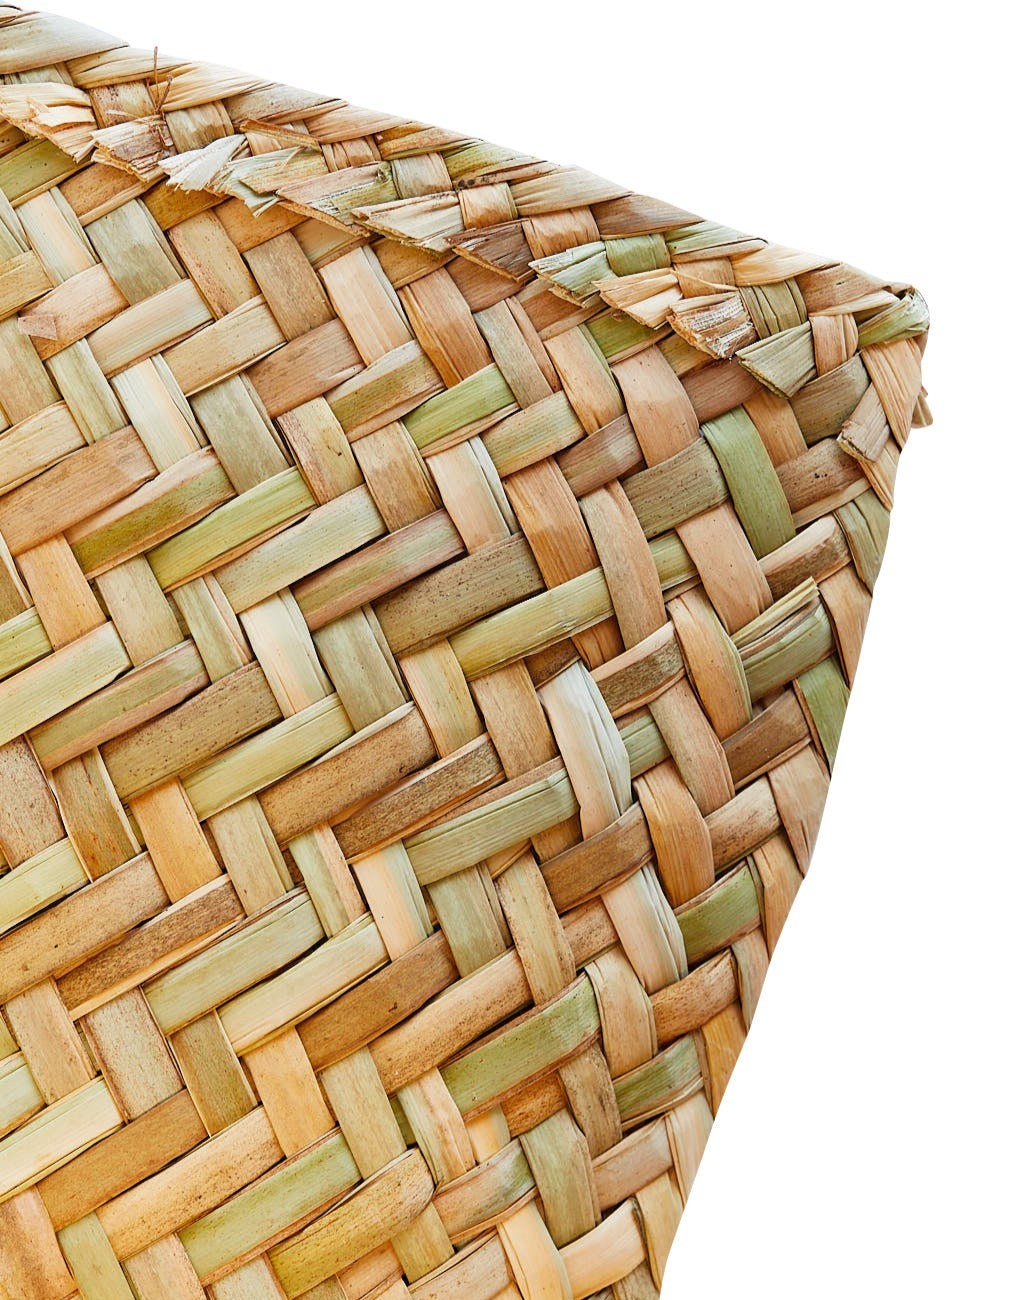 a close up of a woven basket on a white background